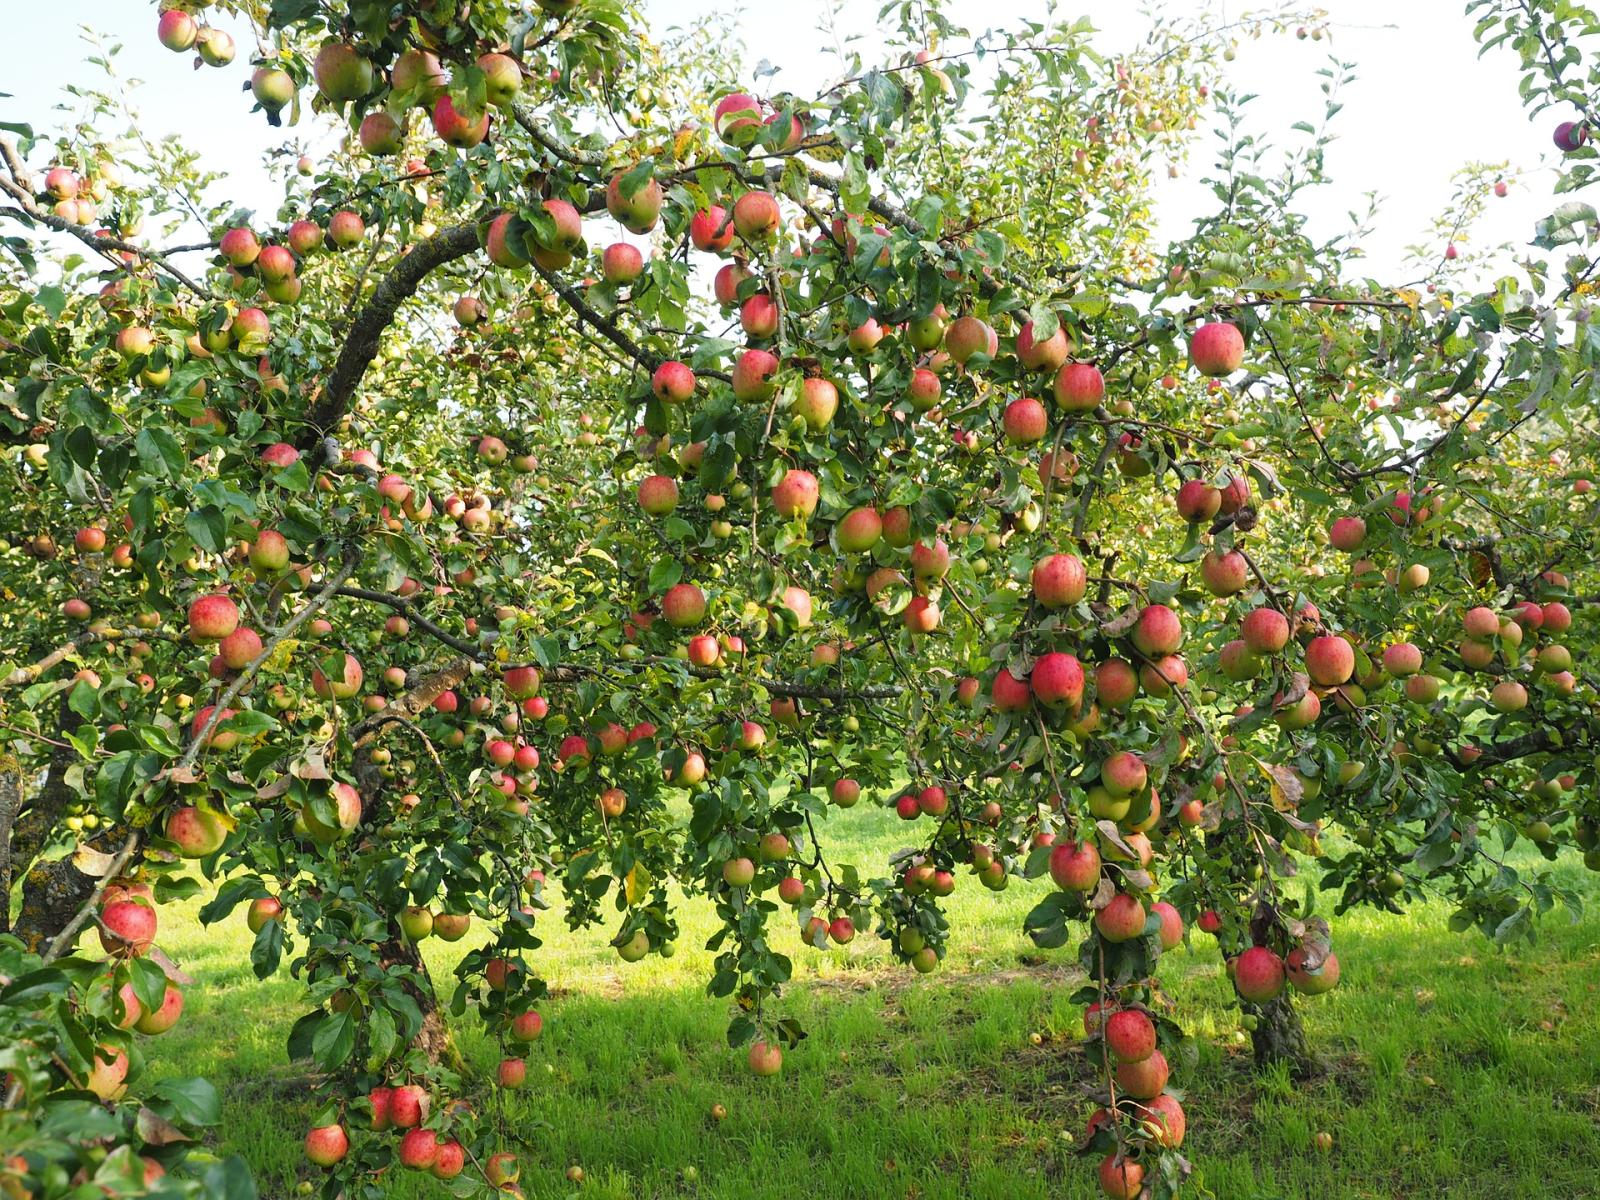 Apple Tree with Fruits